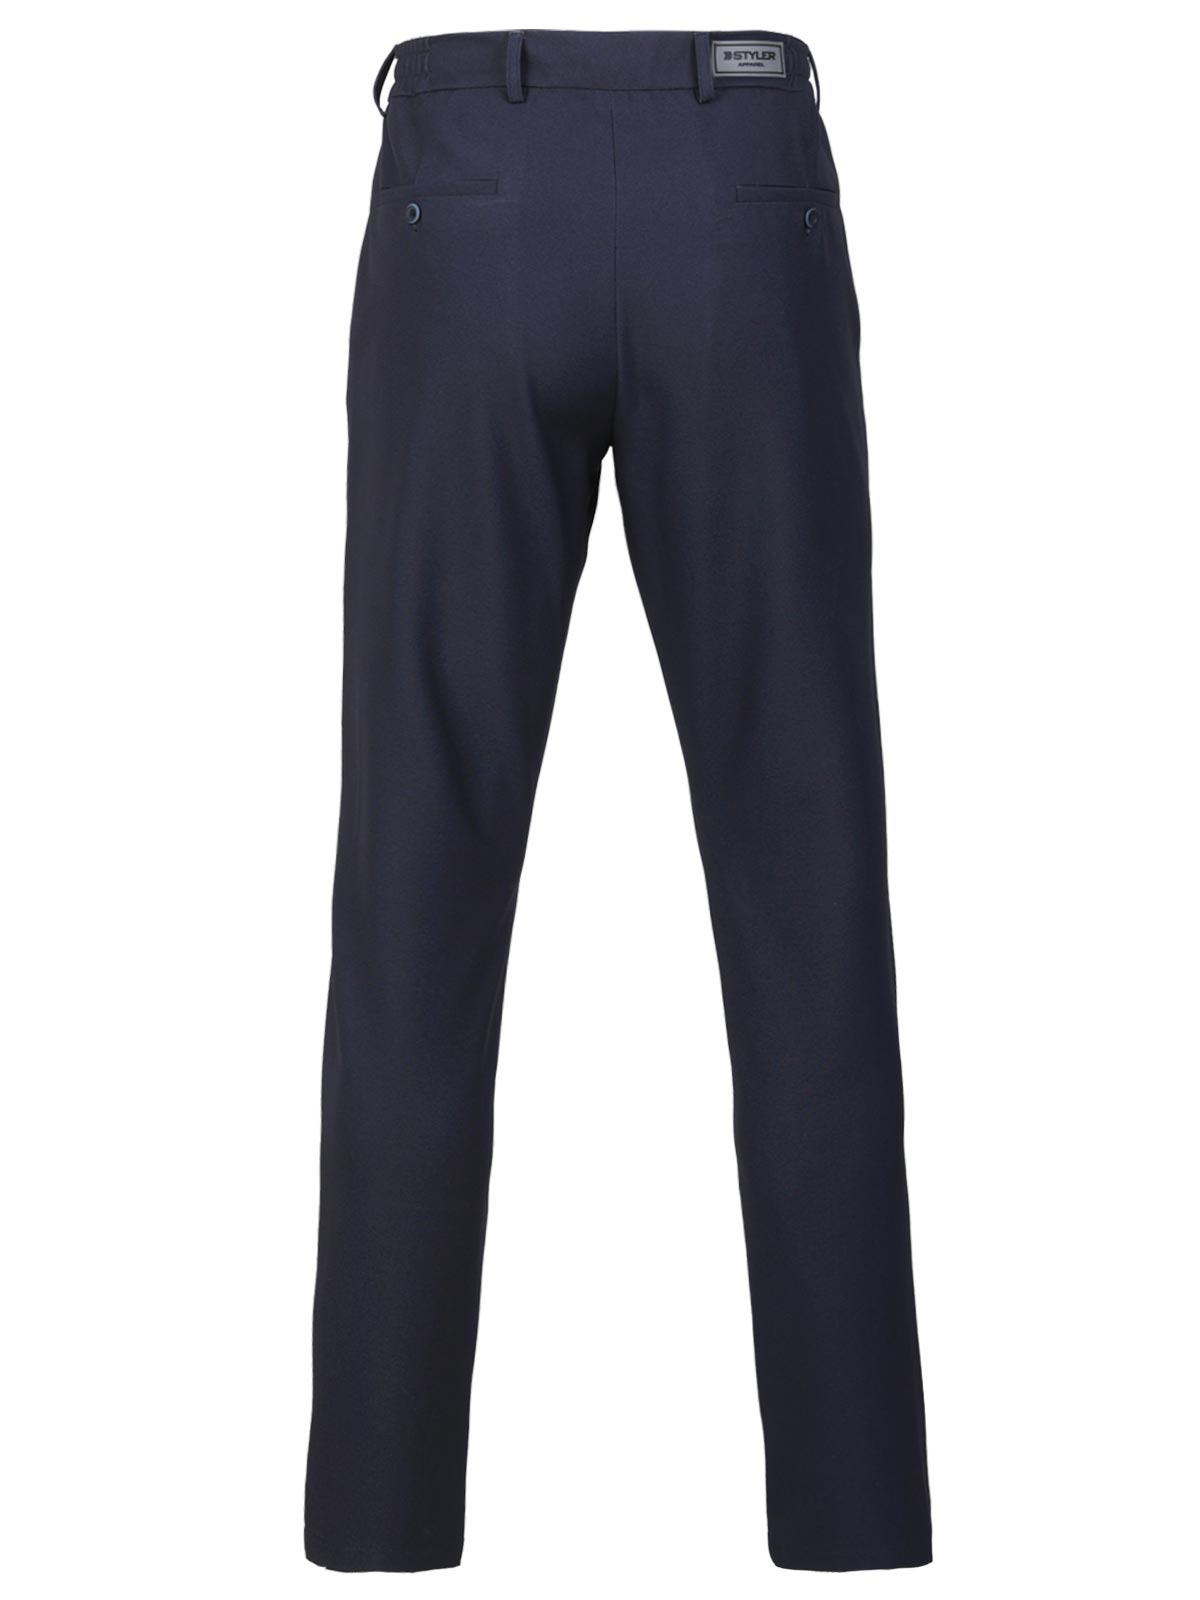 Pants in dark blue with laces - 29013 € 55.12 img2